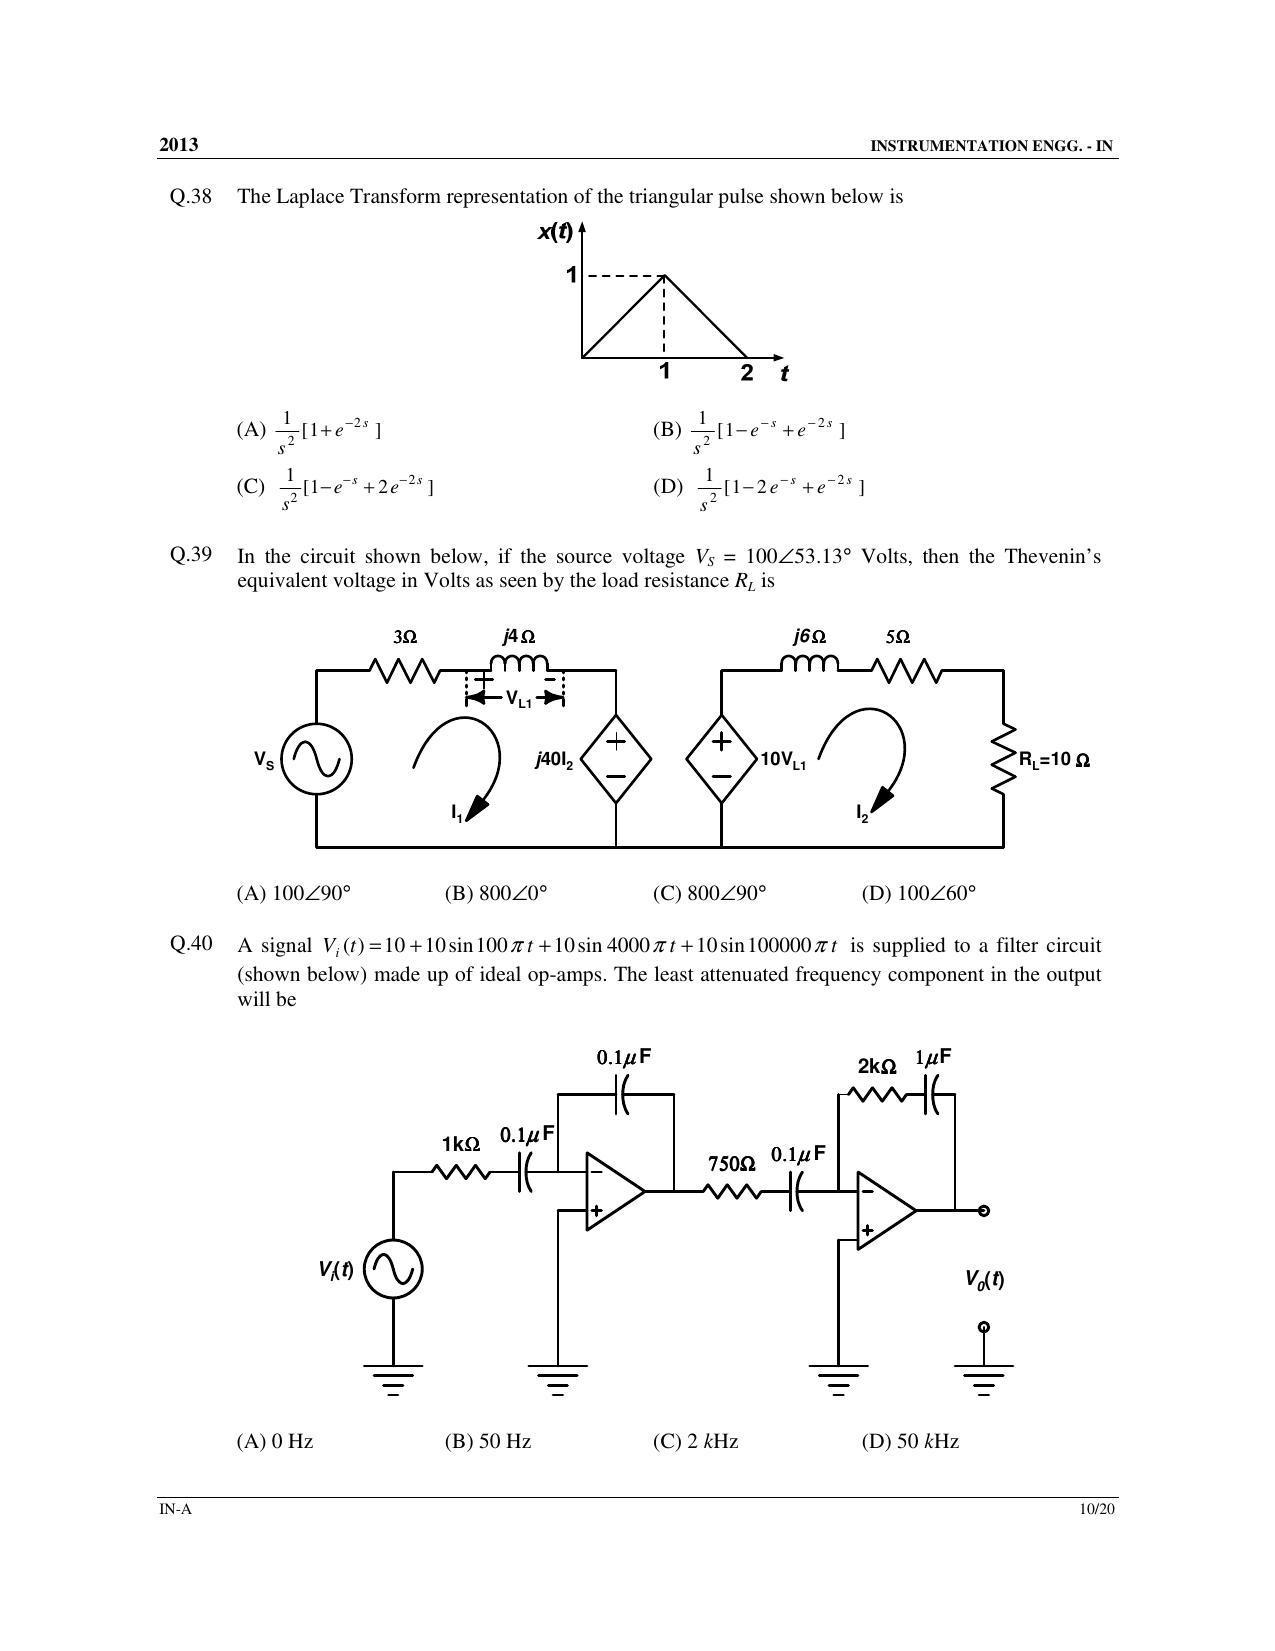 GATE 2013 Instrumentation Engineering (IN) Question Paper with Answer Key - Page 11